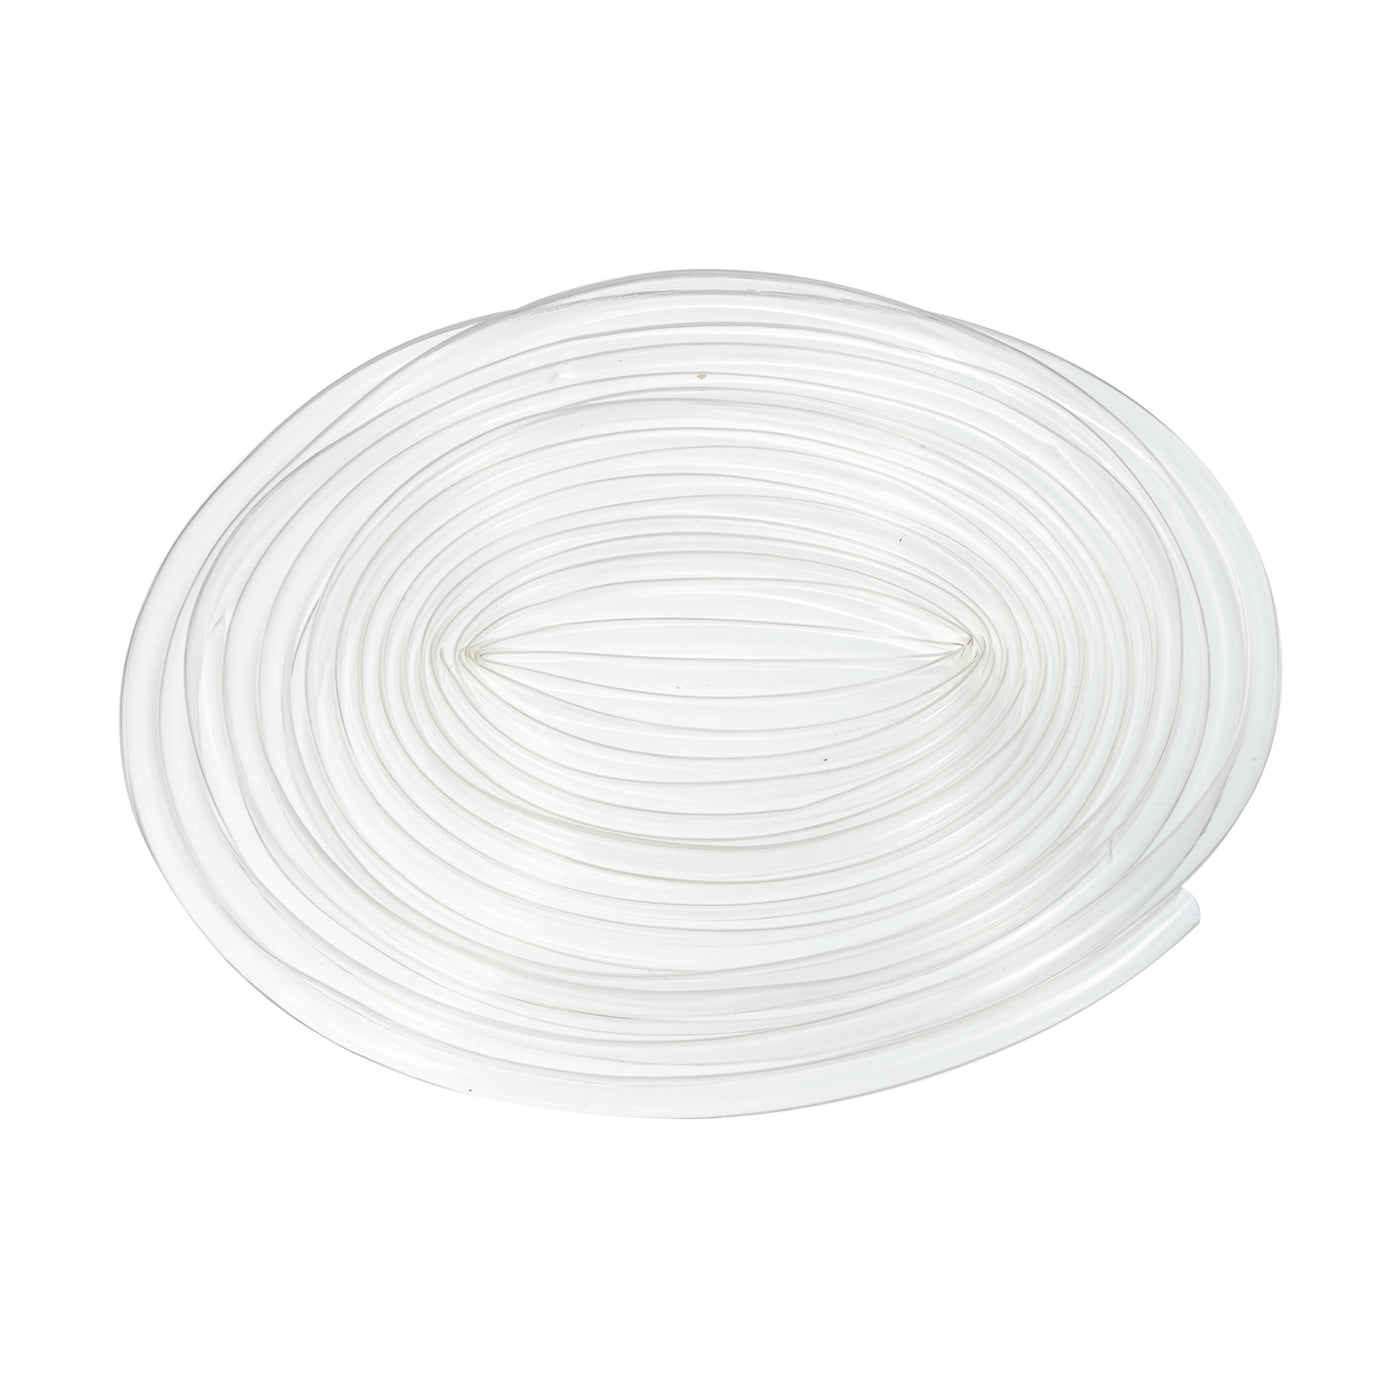 uxcell Uxcell Clear PVC Tube Wire Harness Tubing, 5/16-inch(8mm) ID 23ft Sleeve for Wire Sheathing Wire Protection